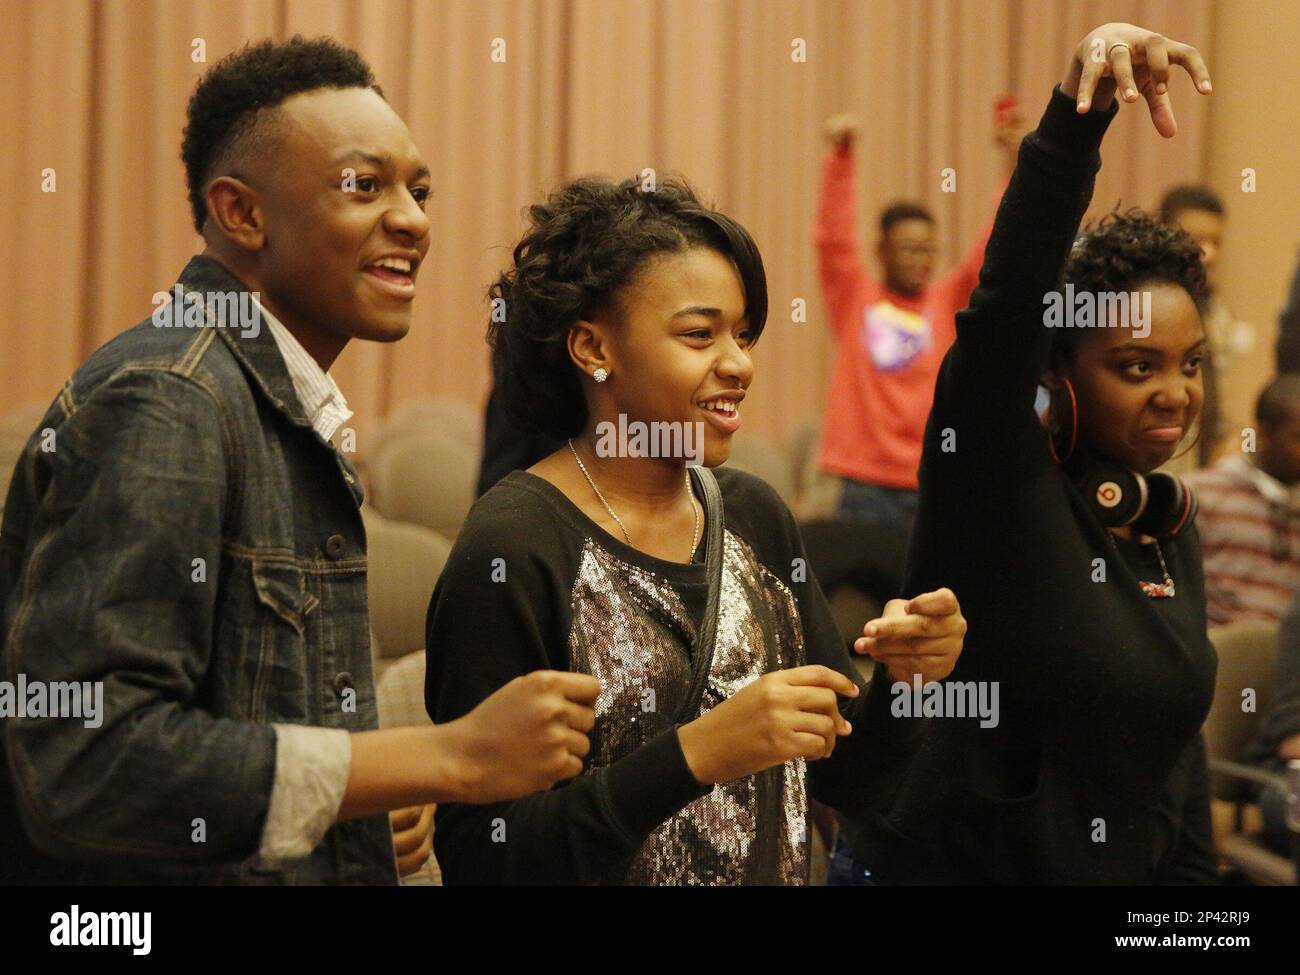 In a Thursday, Oct. 23, 2014 photo, Stax Music Academy students, from left,  DeKarius Dawson, Zalissa Stewart and Brenae Johnson encourage a classmate  who was performing during the IU Soul Revue class